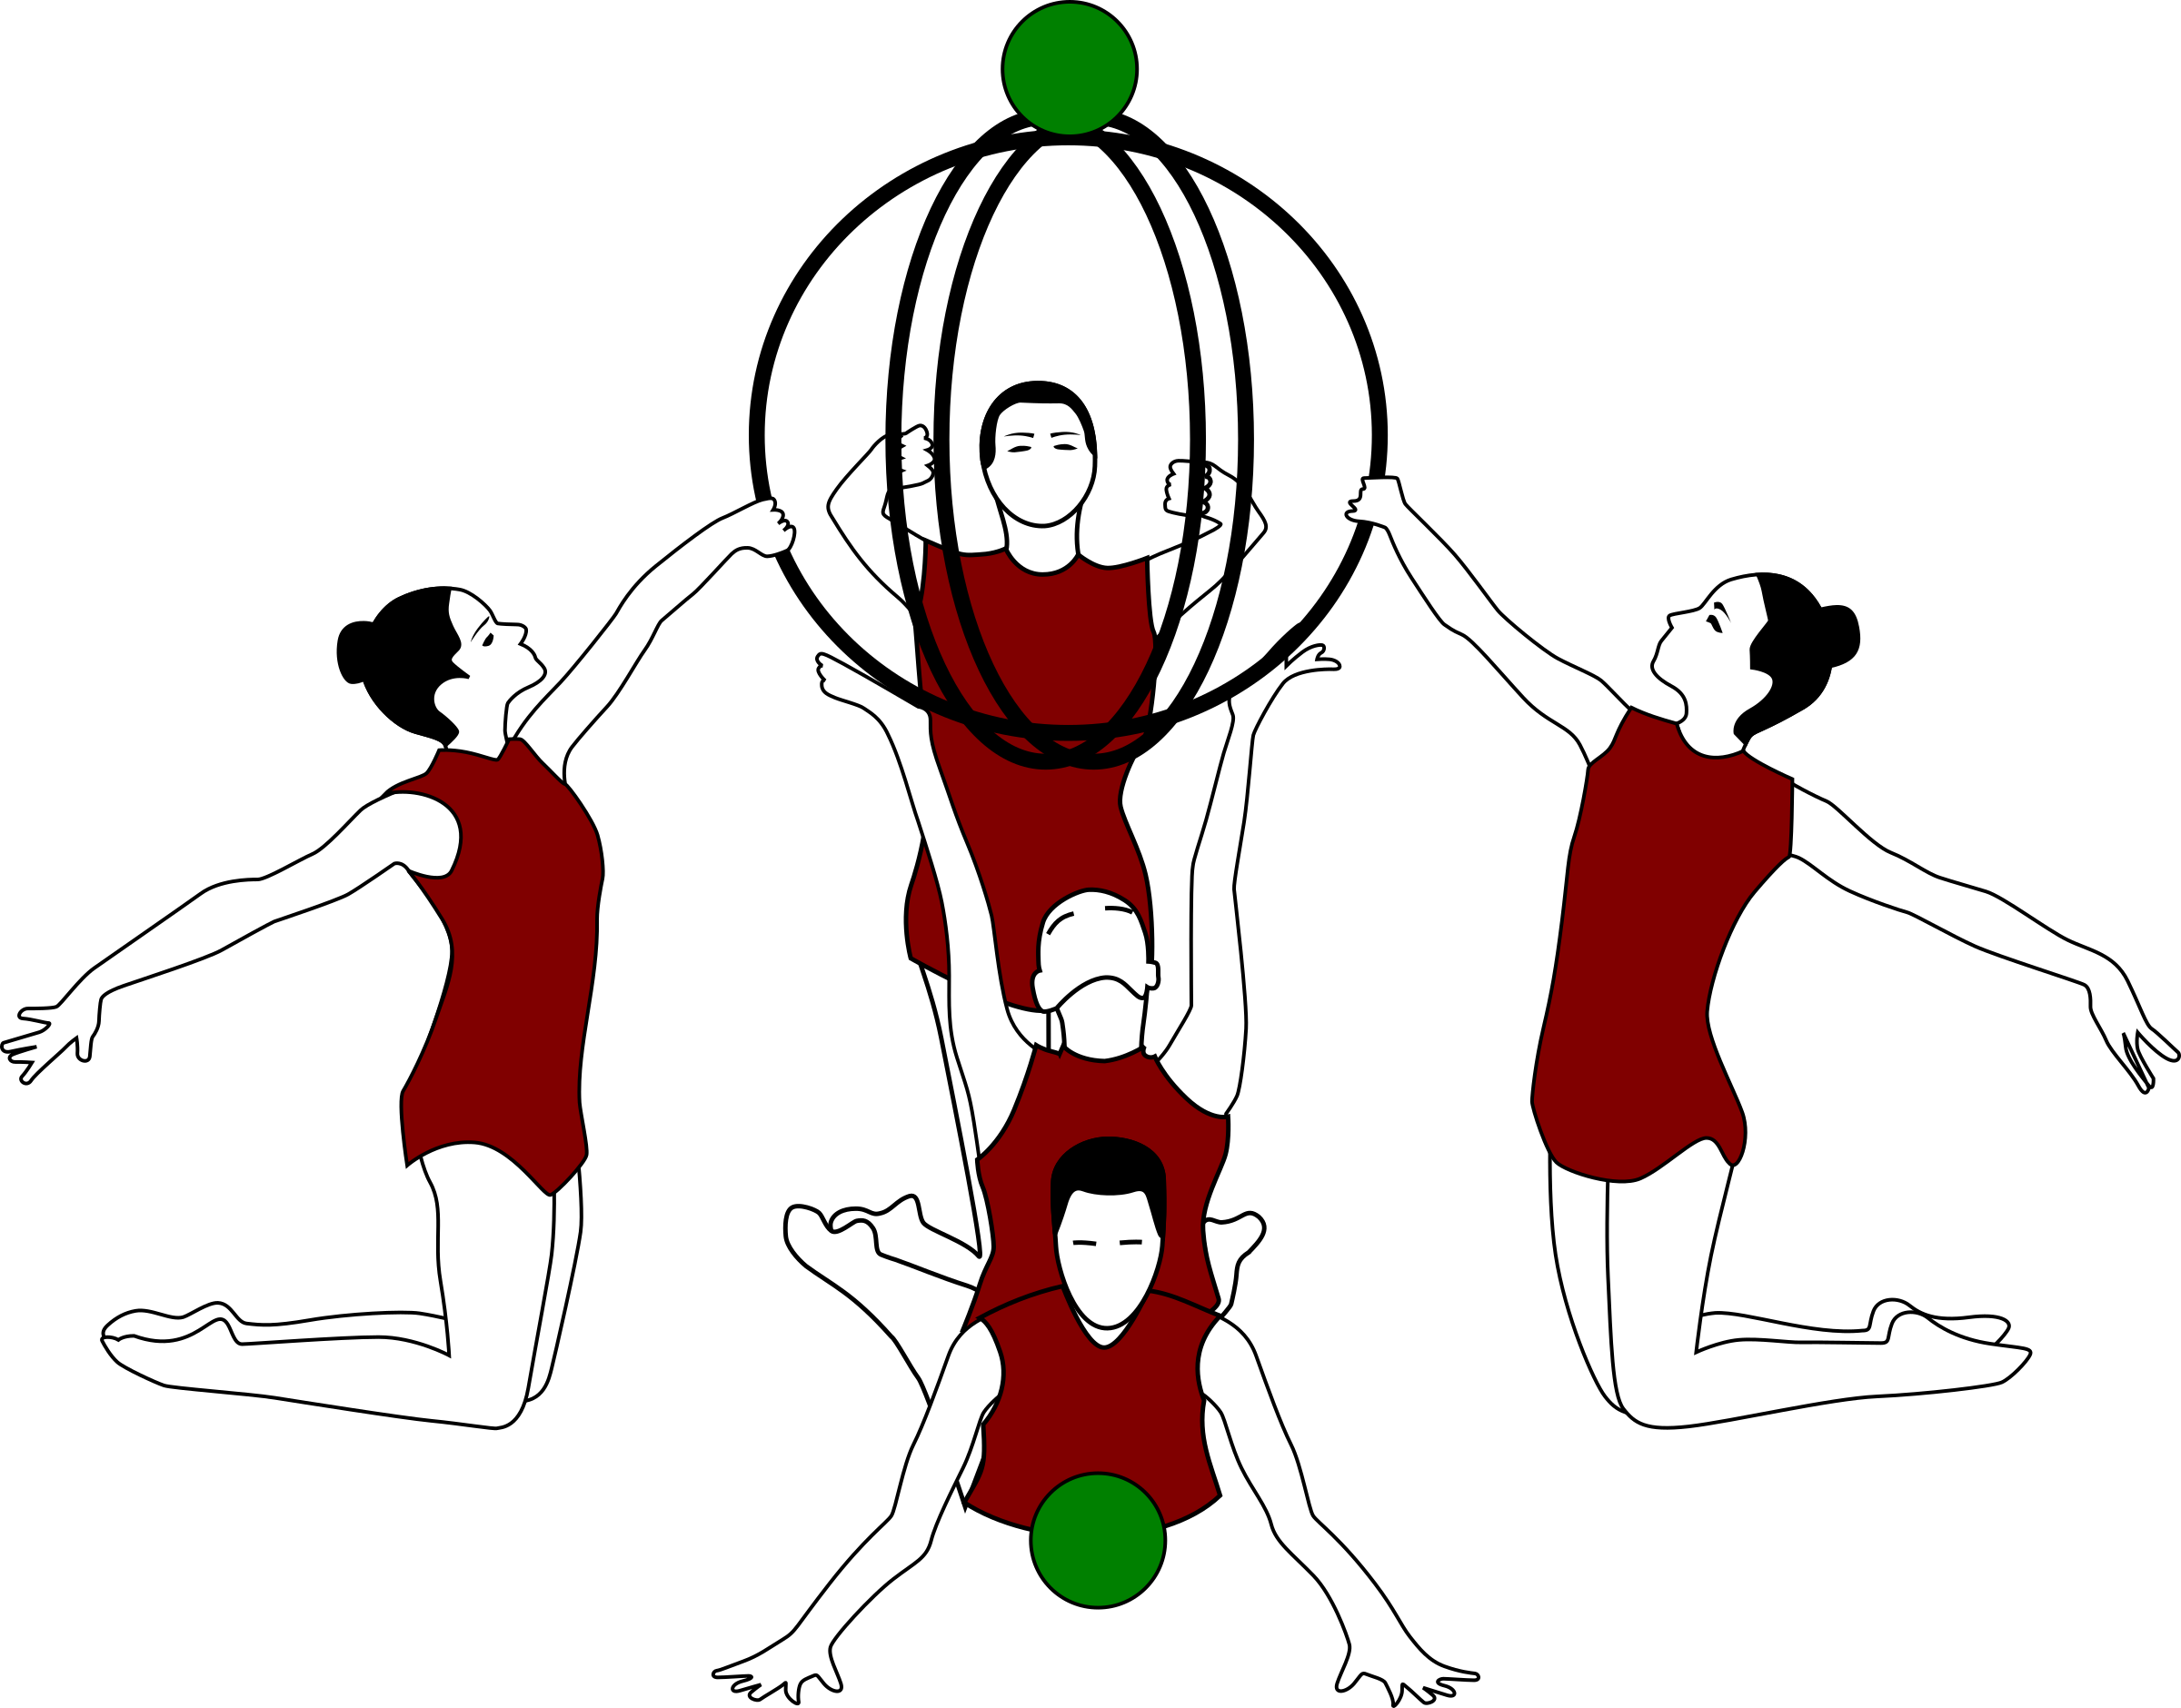 Gymnastics clipart icon. Rhythmic with bows and